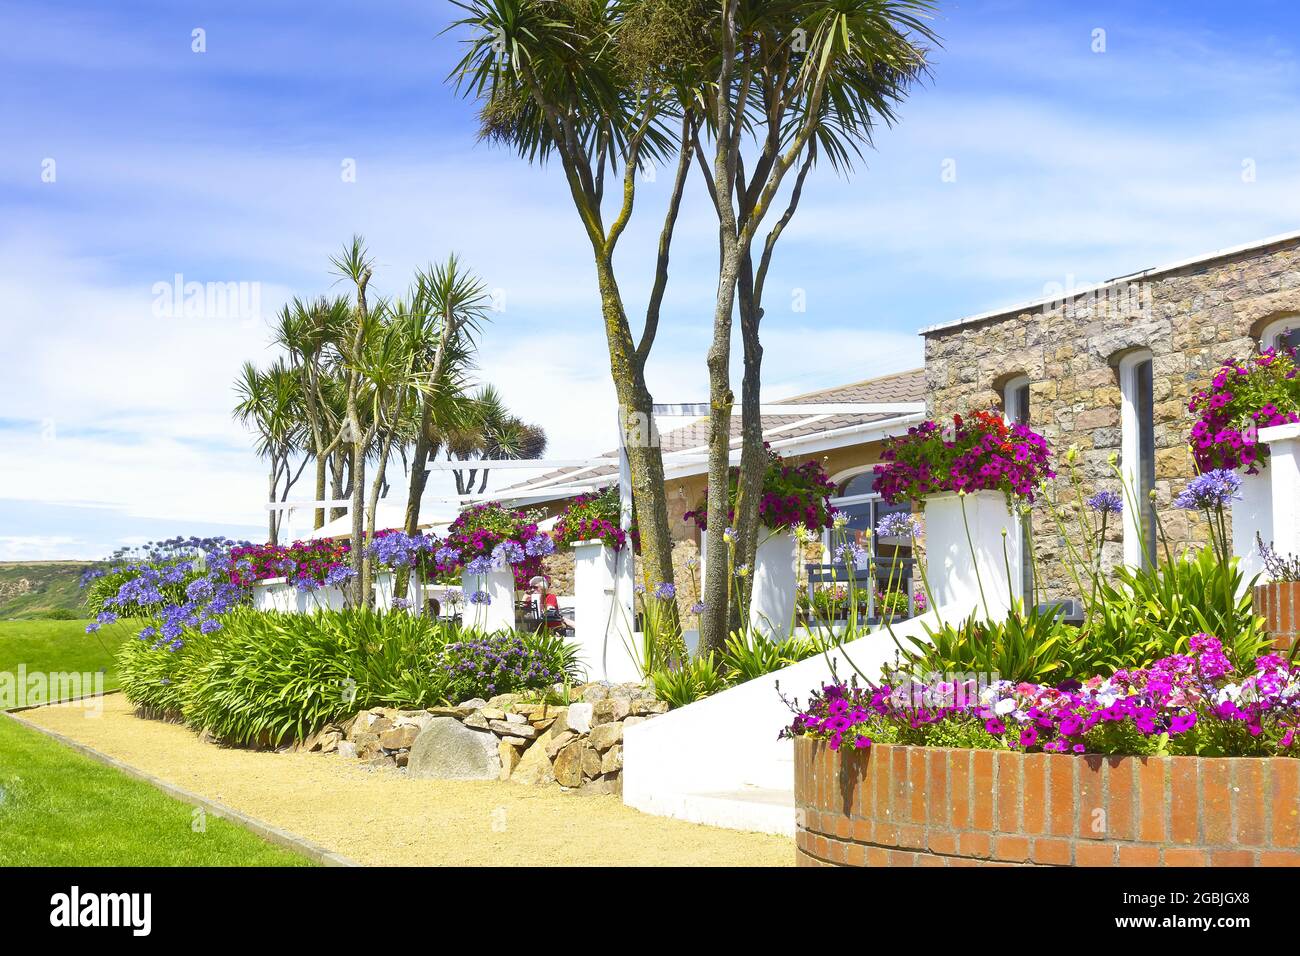 St Ouen, Jersey, Channel Islands, UK - July 7, 2016: subtropical vegetation  at the cafe terrace of the Jersey Pearl showroom on a sunny day in summer  Stock Photo - Alamy